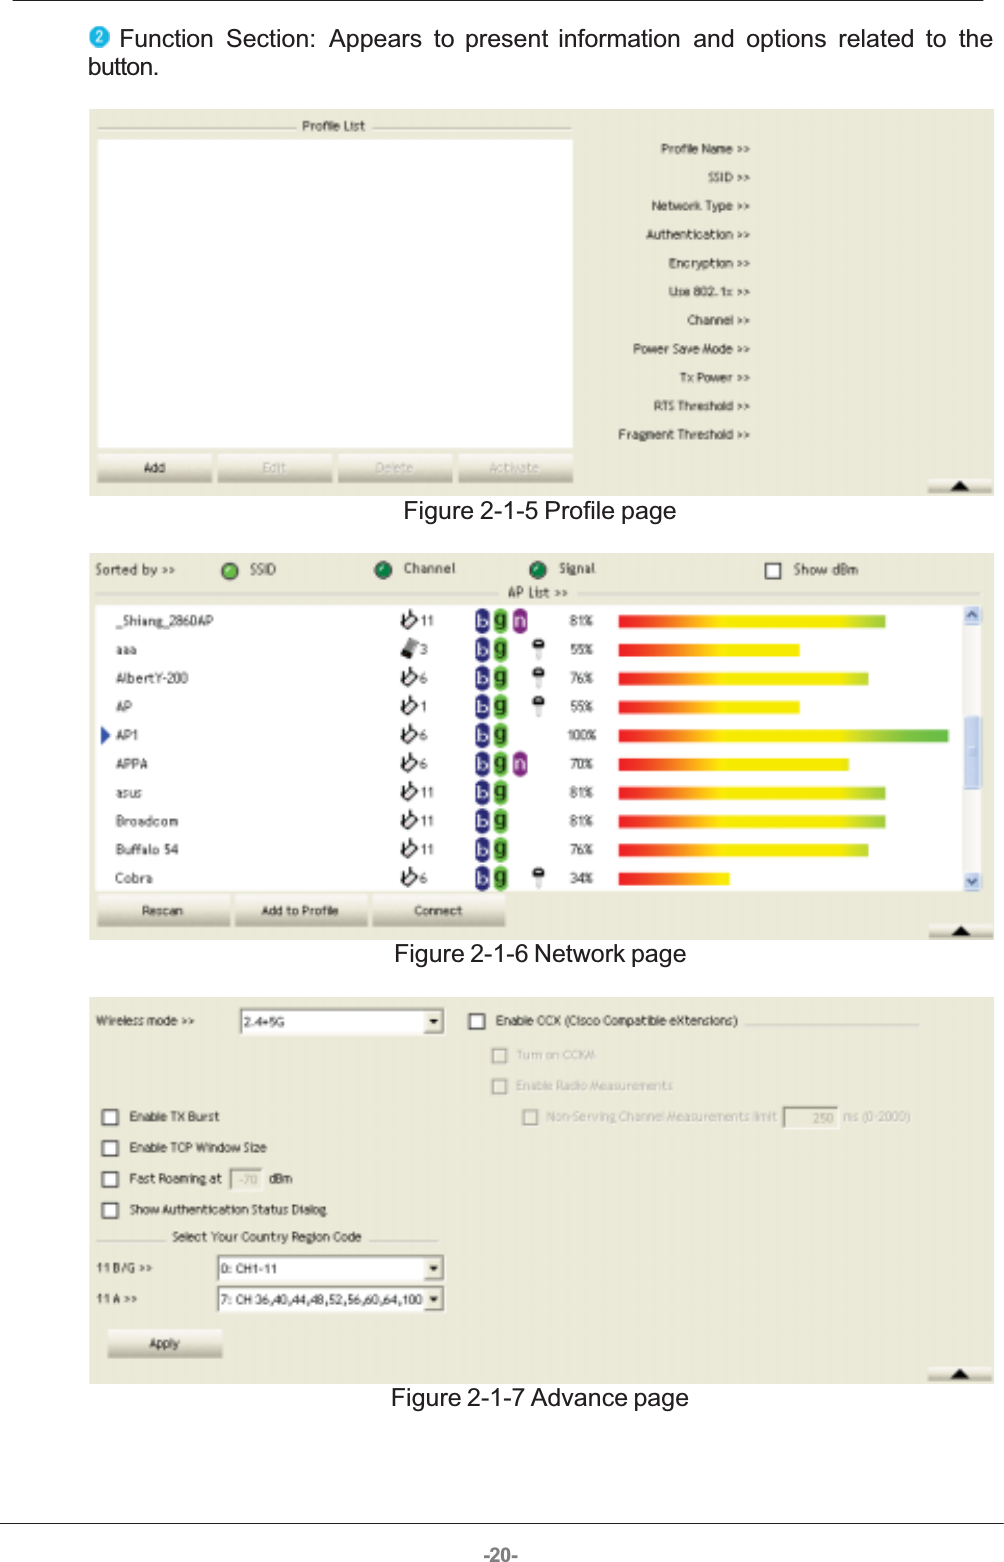 -20- Function  Section:  Appears  to  present  information  and  options  related  to  thebutton. Figure 2-1-5 Profile page Figure 2-1-6 Network page Figure 2-1-7 Advance page 